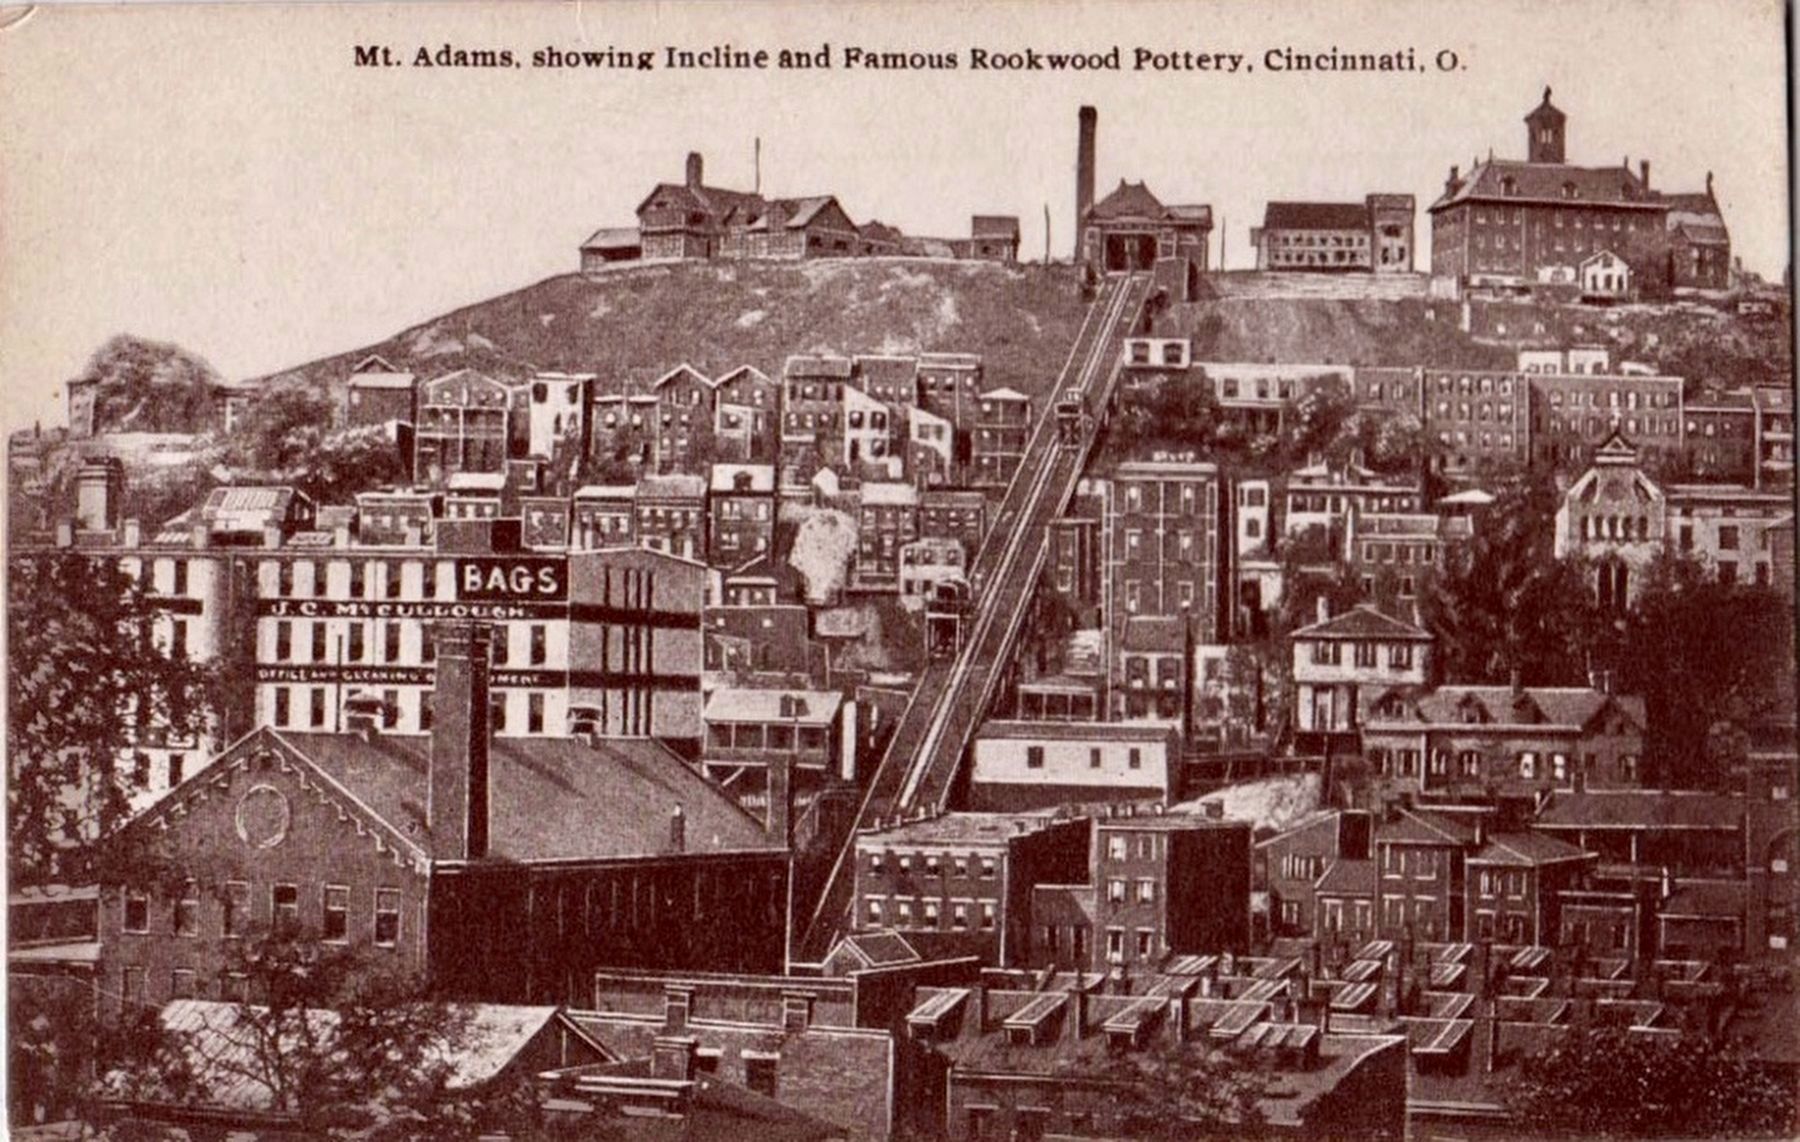 <i>Mt. Adams, showing Incline and Famous Rookwood Pottery, Cincinnati, O.</i> image. Click for full size.